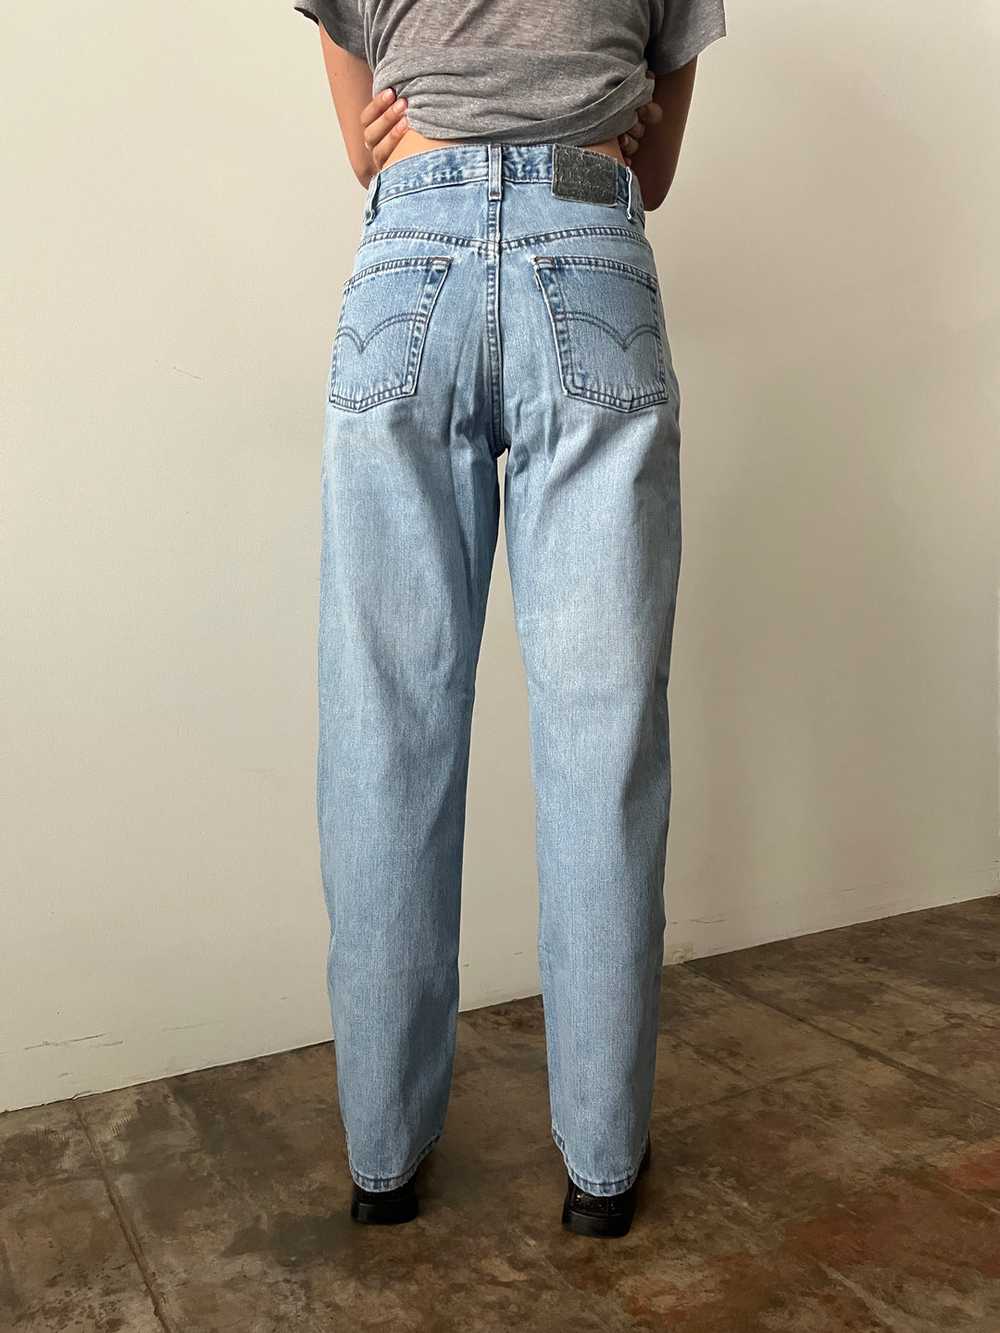 90s Levis Silvertab Jeans - image 5